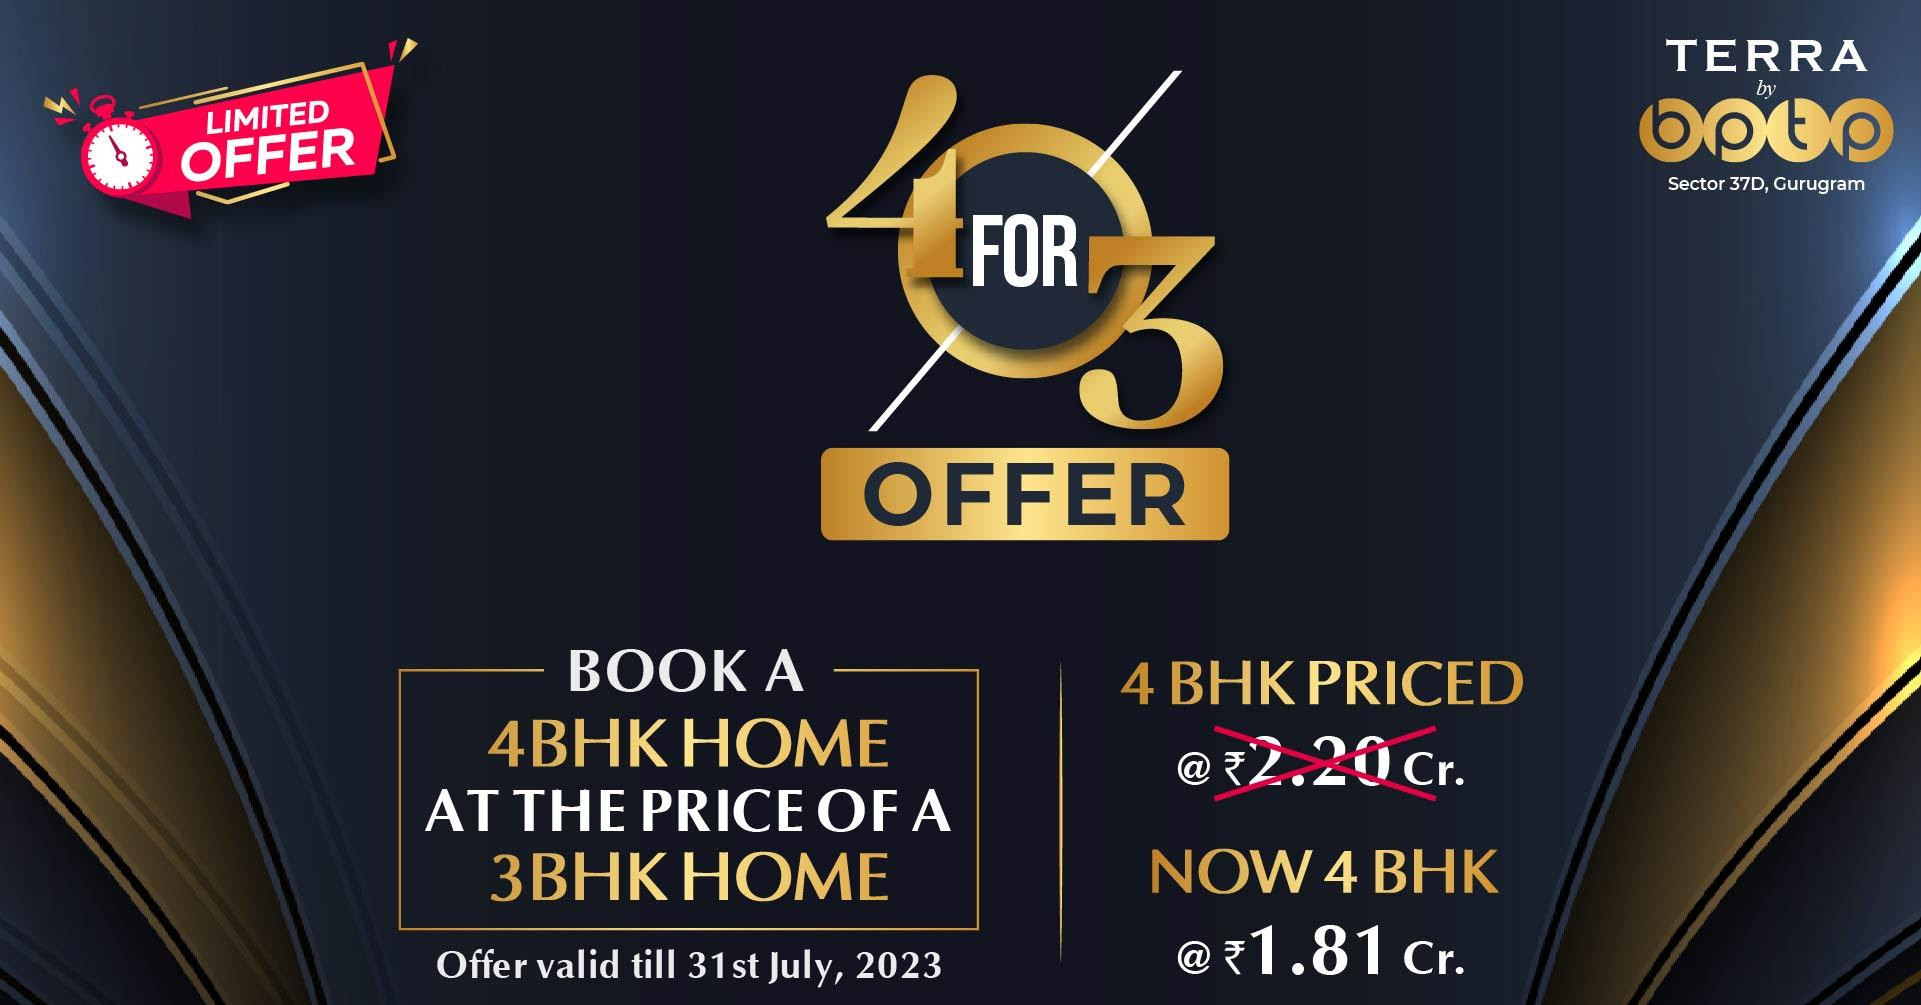 Book 4 BHK home and price of a 3 BHK at BPTP Terra, Sector 37D, Gurgaon Update